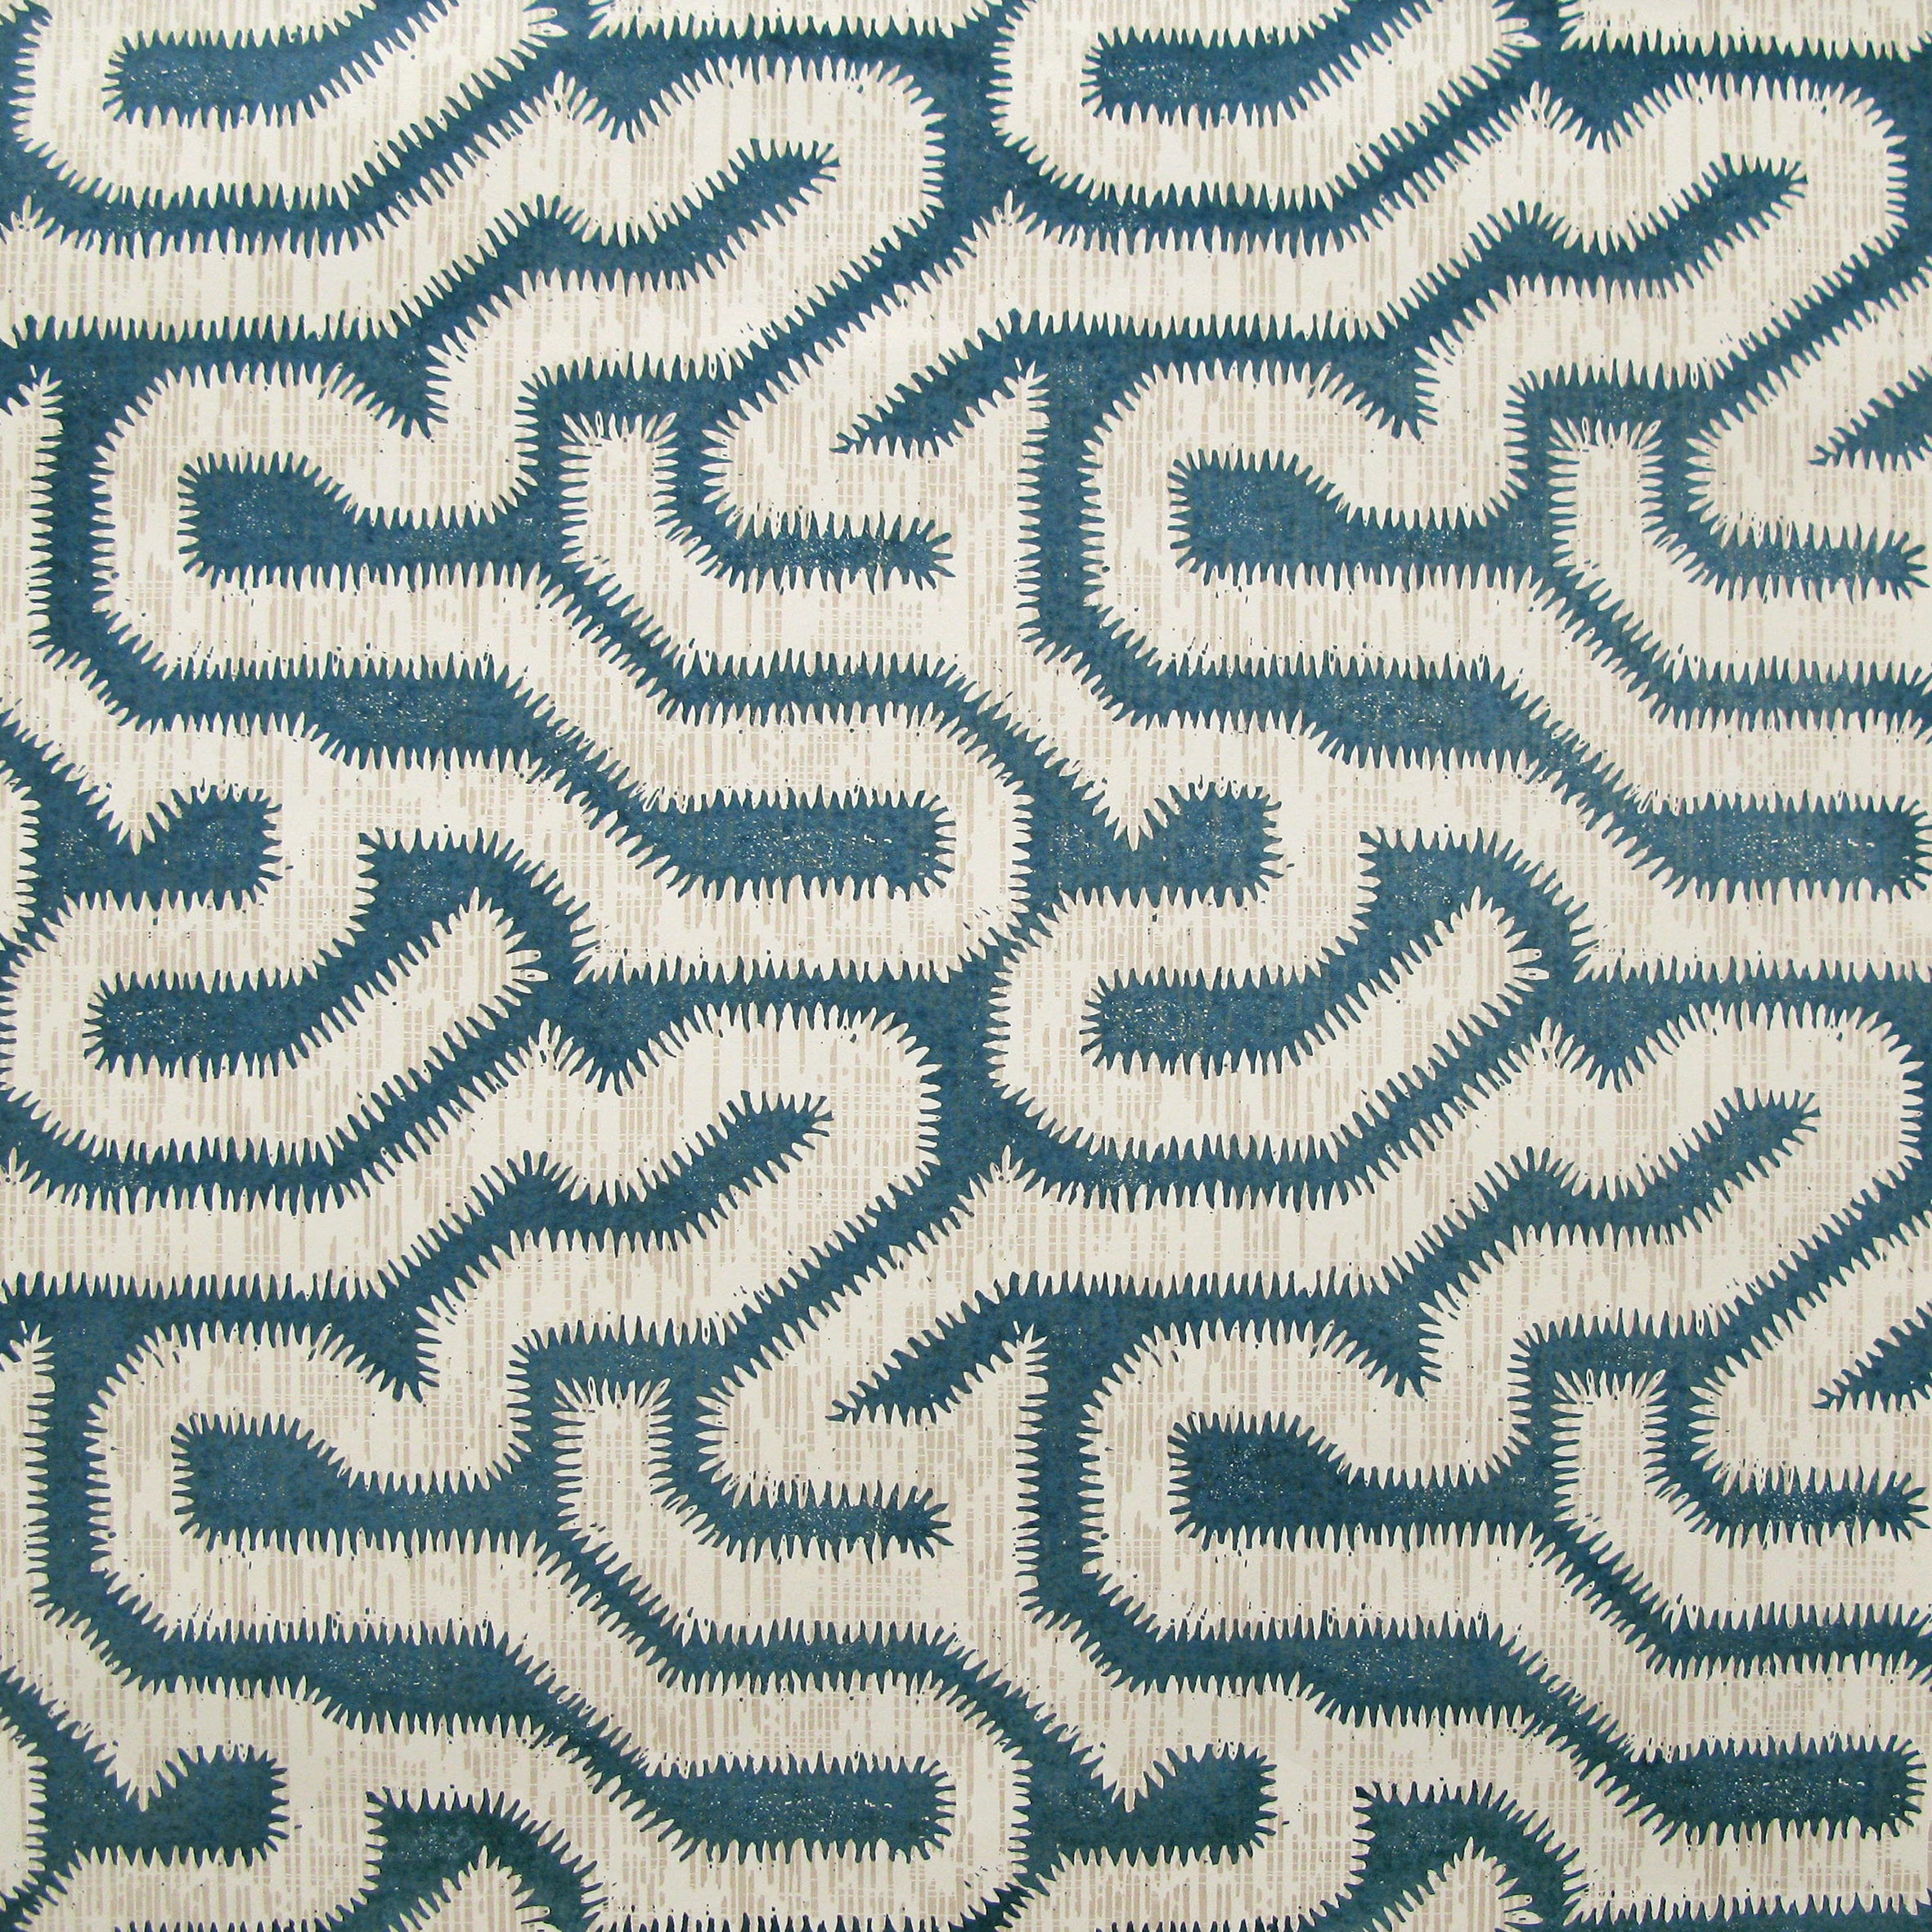 Detail of wallpaper in a playful meandering print in cream on a navy field.